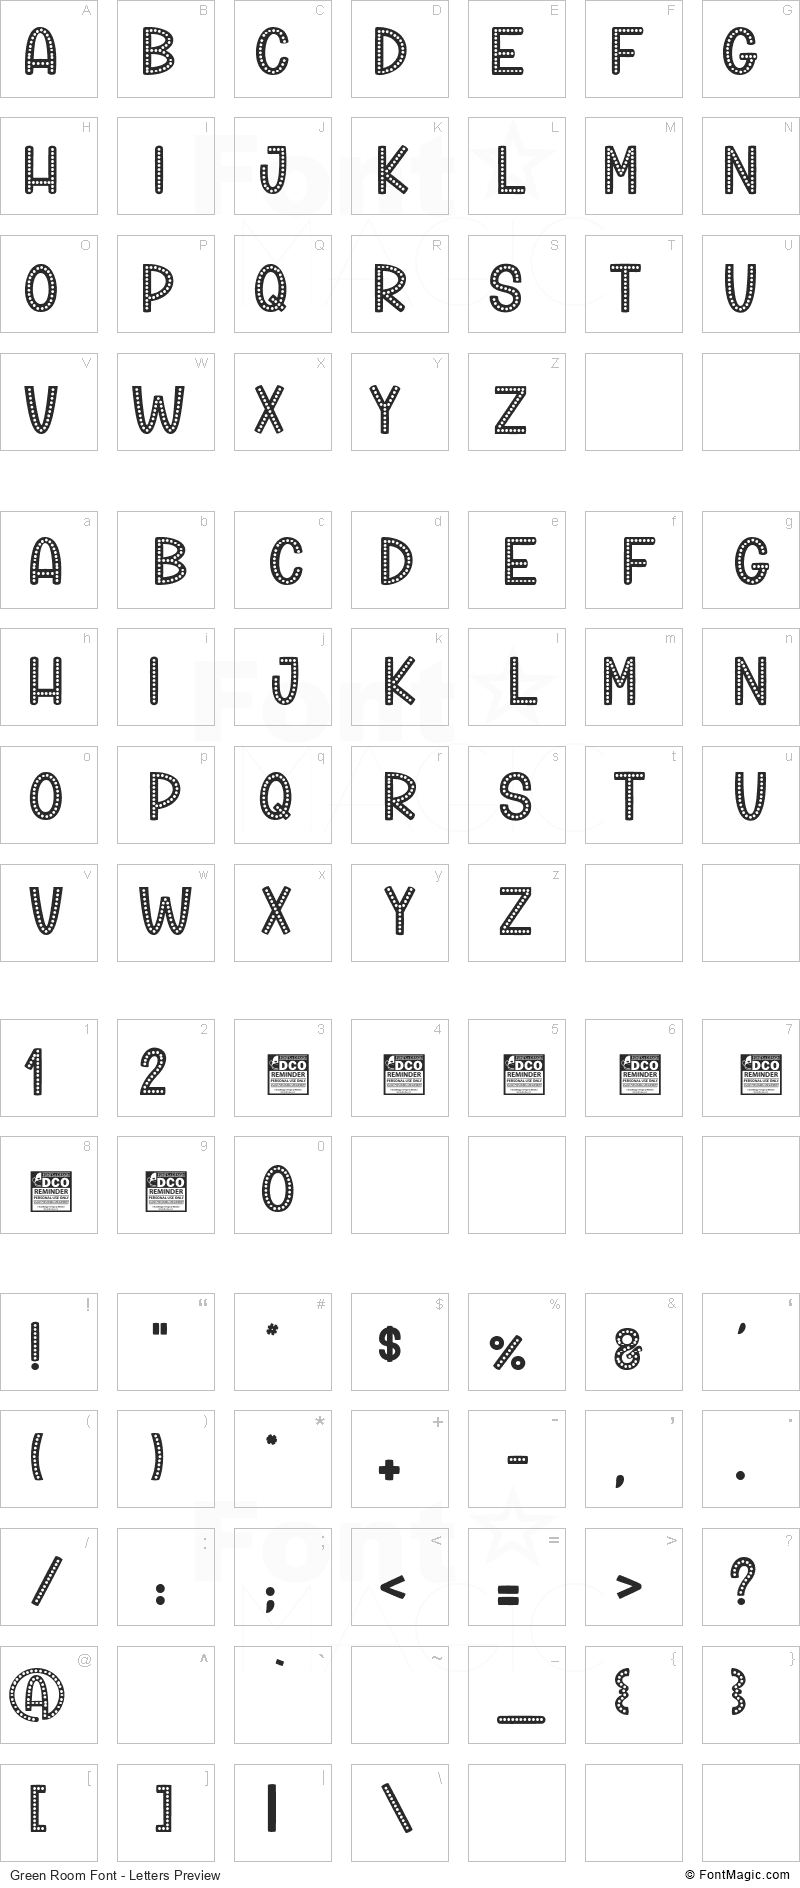 Green Room Font - All Latters Preview Chart